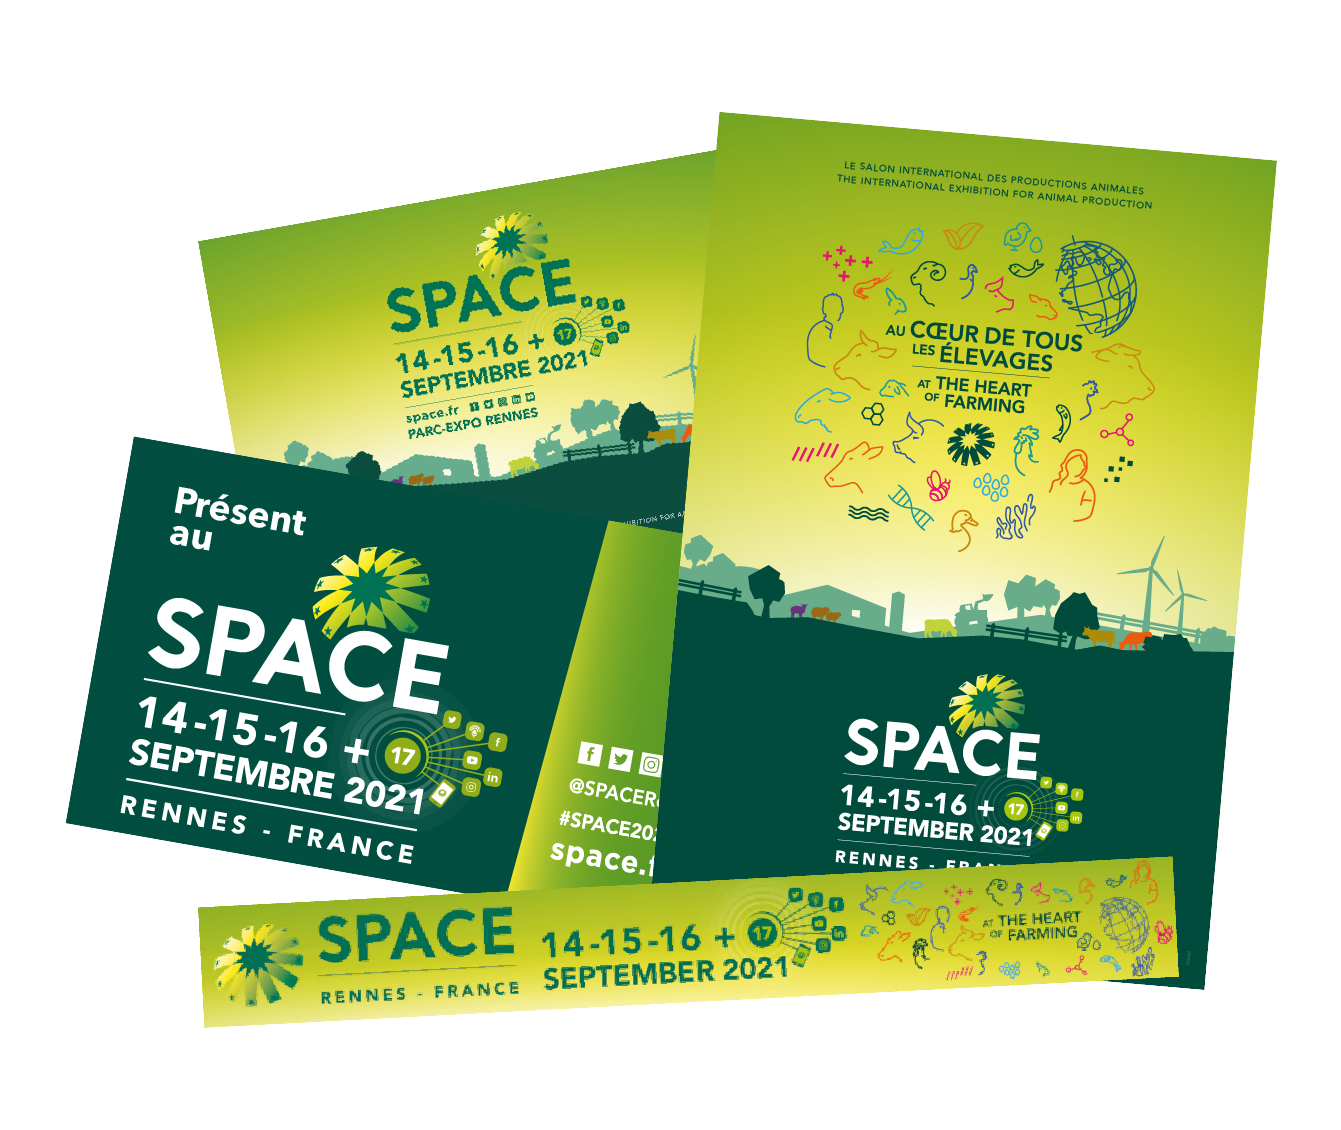 Download our communication kit SPACE 2021